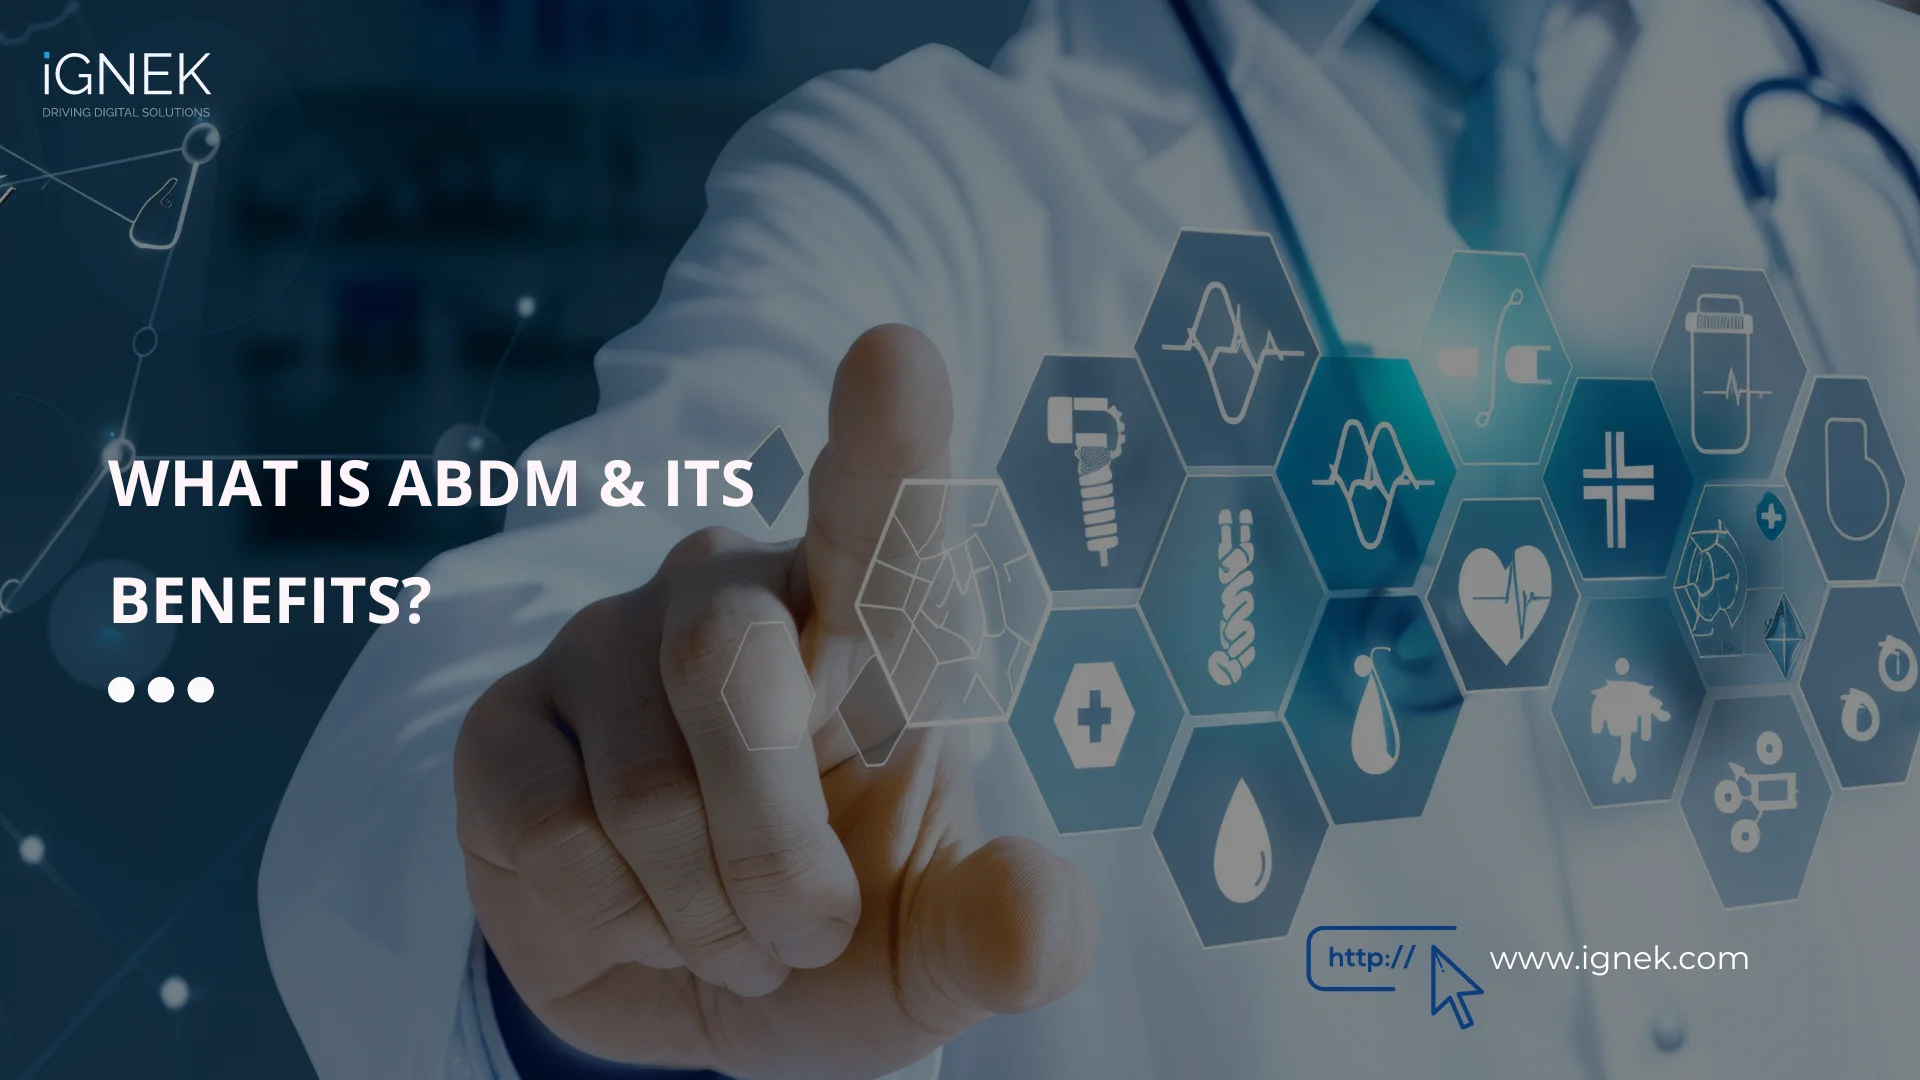 ABDM and its Benefits